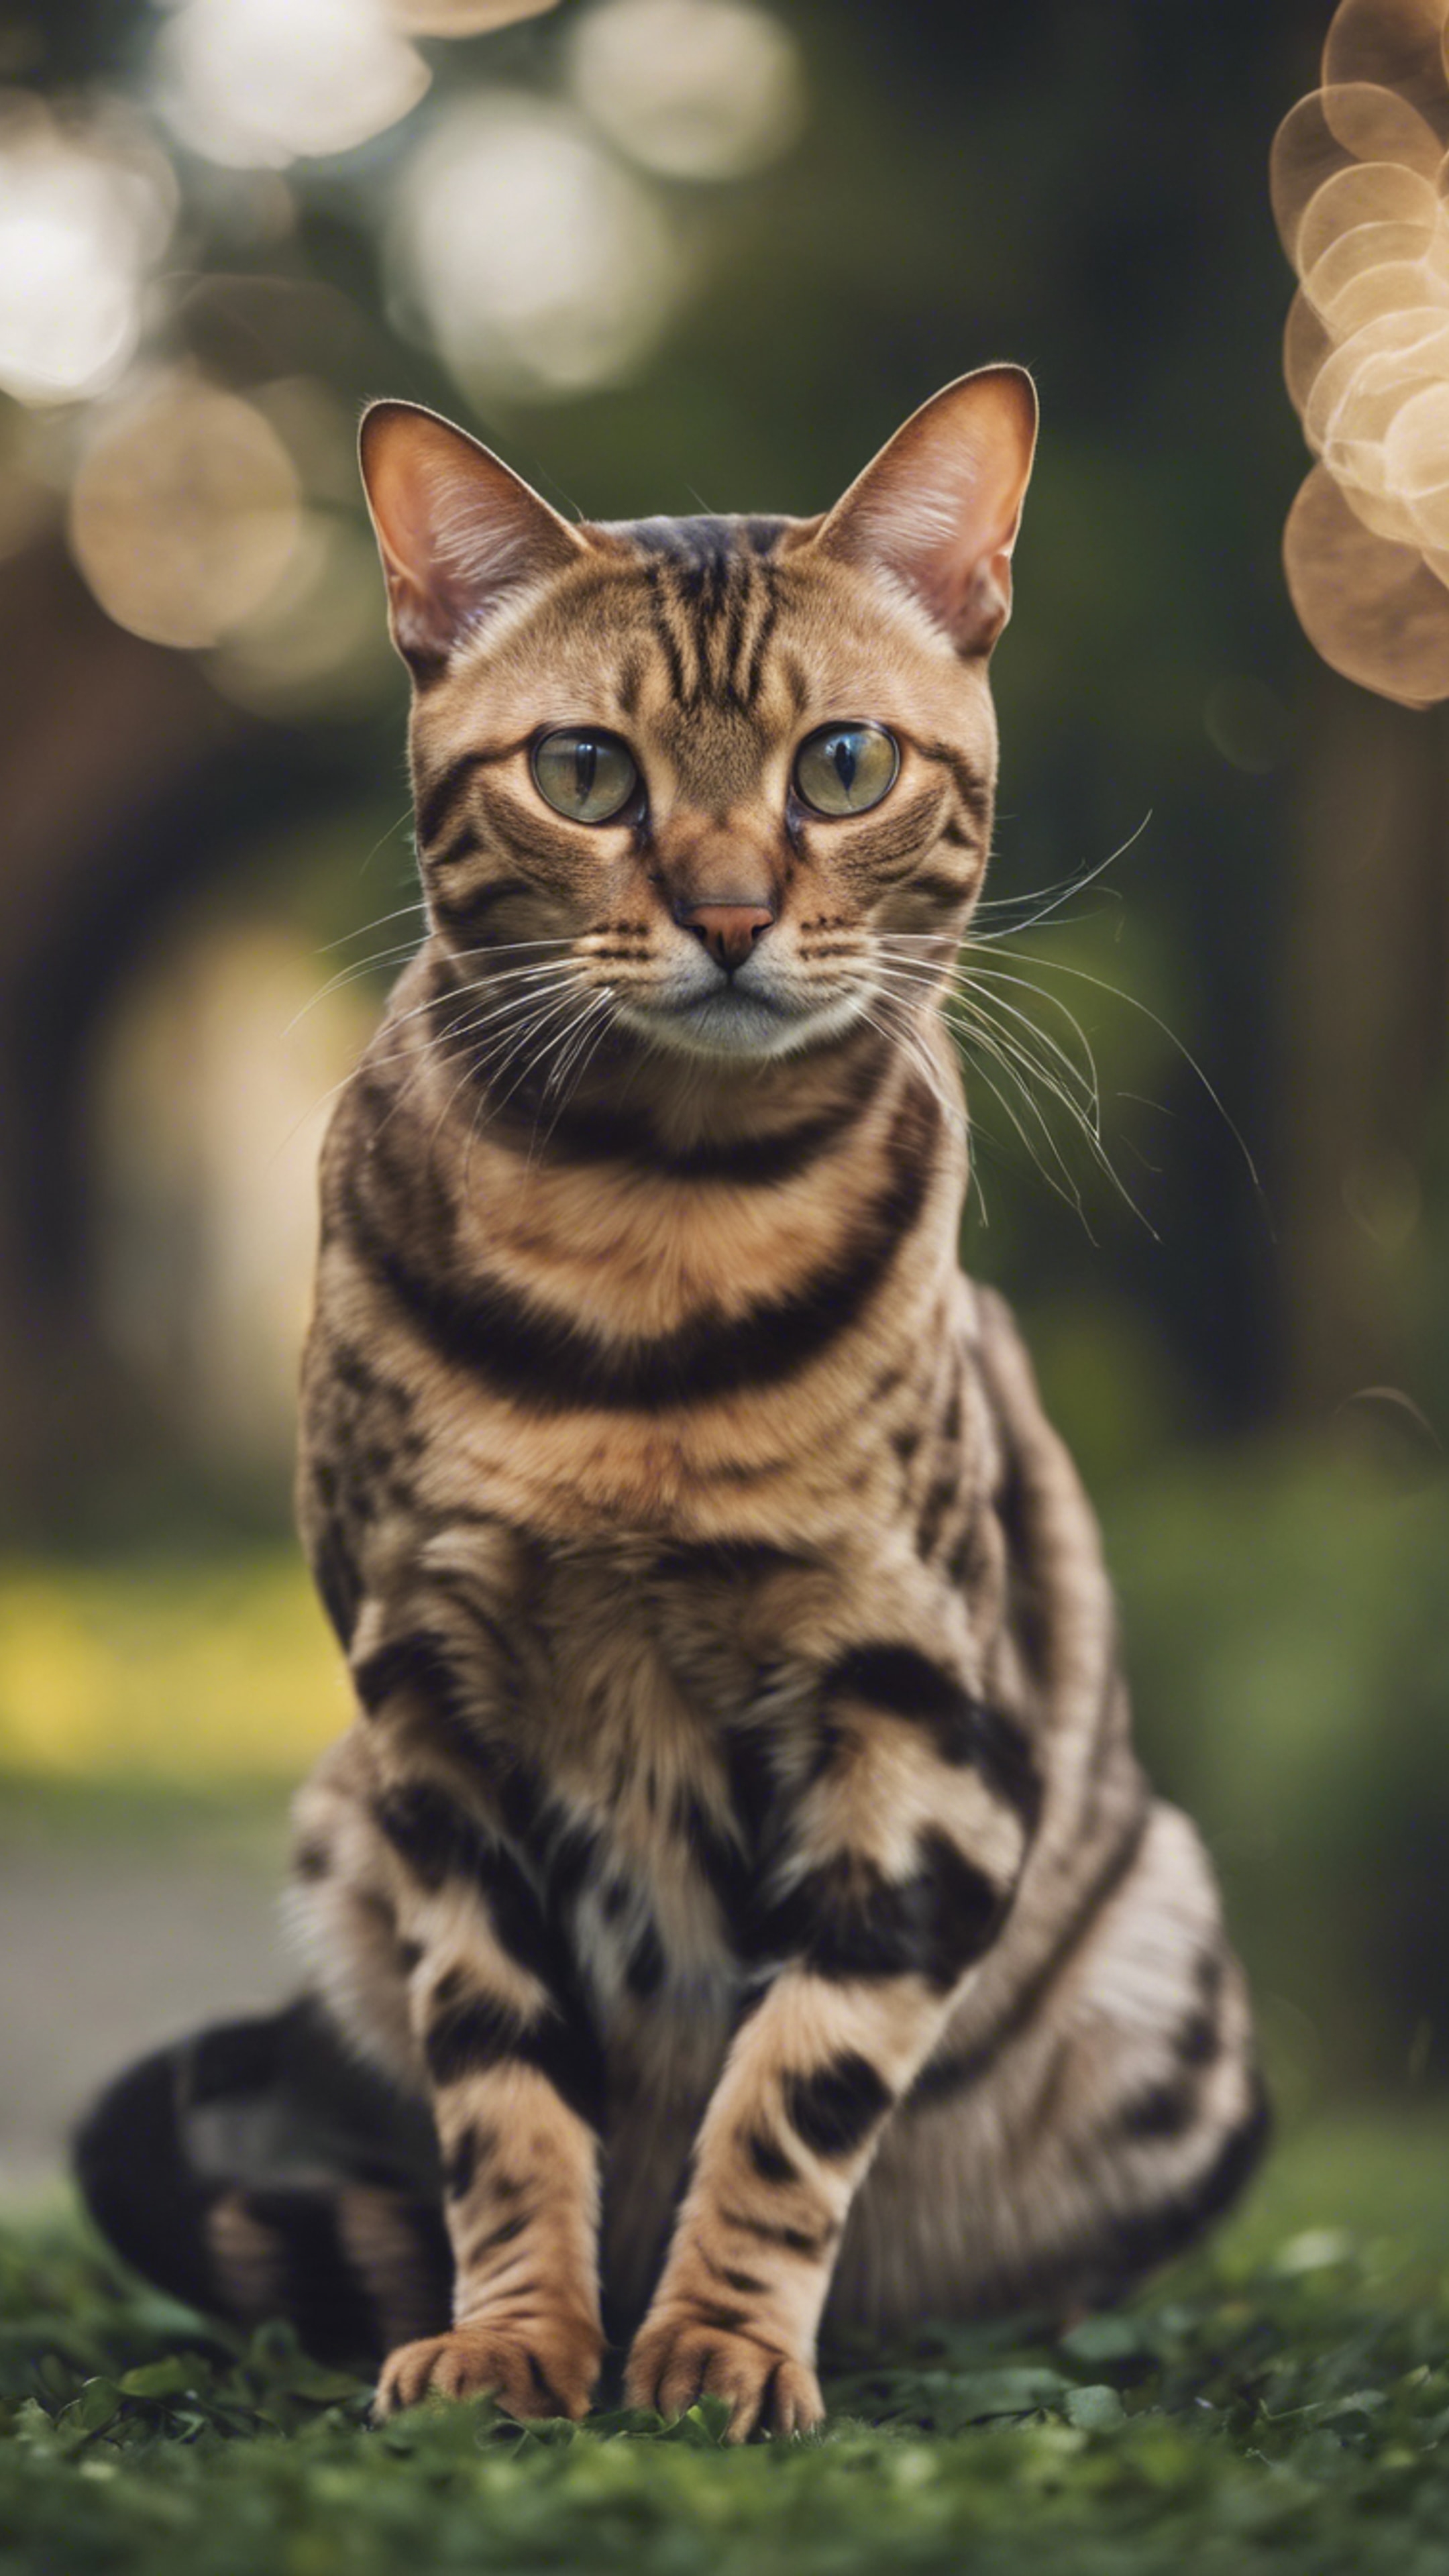 A sleek, aristocratic Bengal cat royally ignoring a mouse scampering by. Wallpaper[9f7ab84a7c6b485a8696]